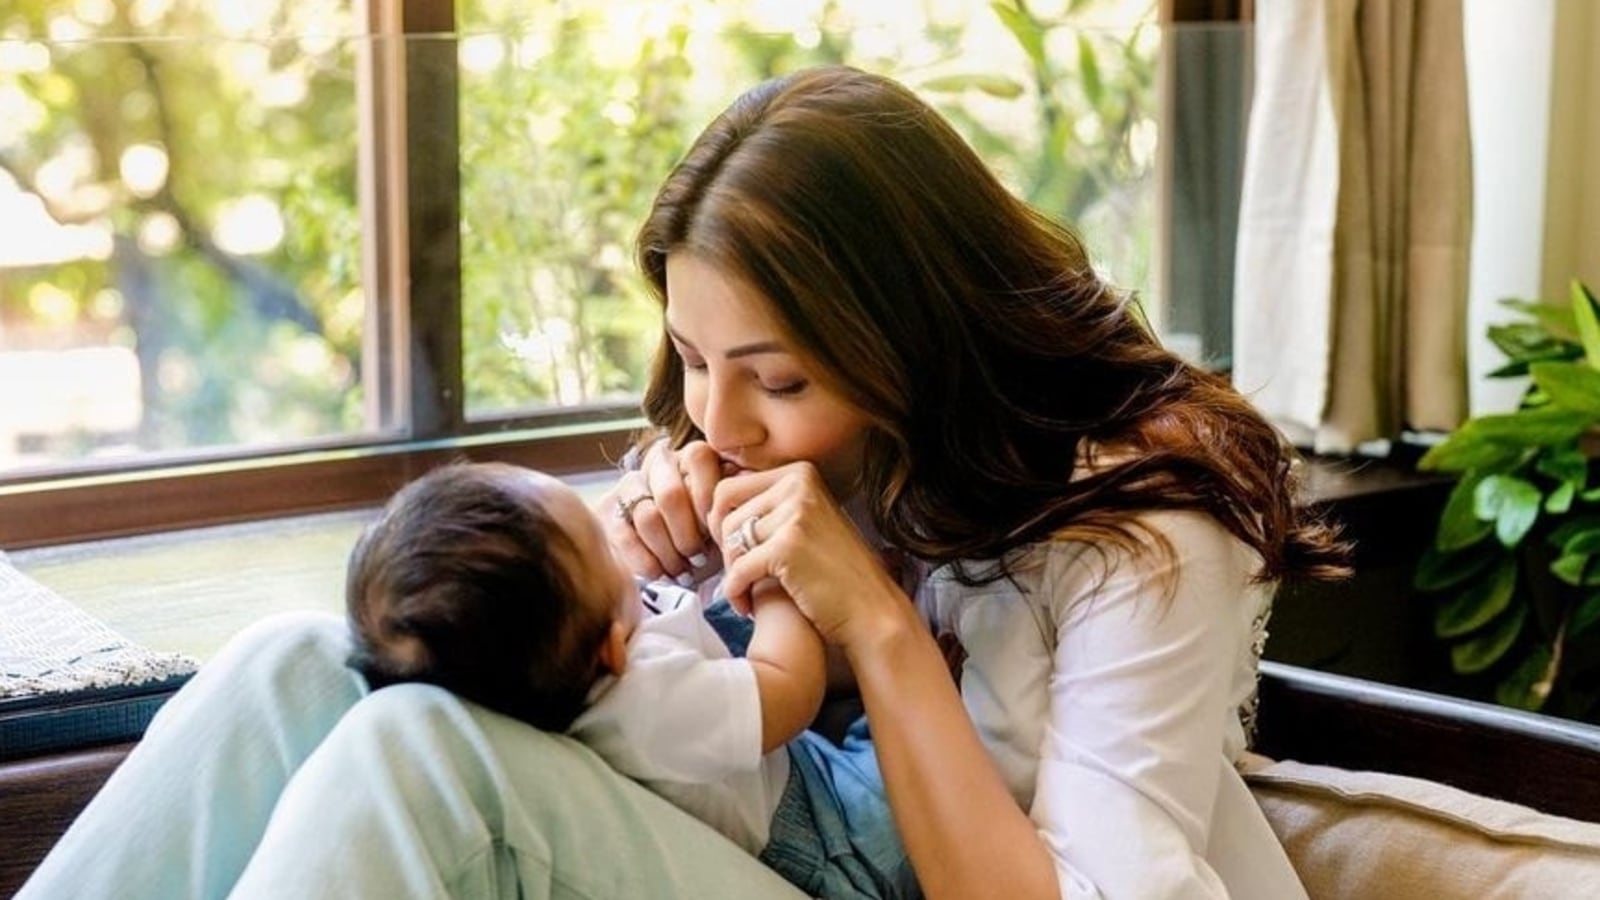 kajal-aggarwal-says-she-s-gone-from-being-scared-young-woman-to-fulfilling-mom-duties-as-son-neil-turns-six-months-old